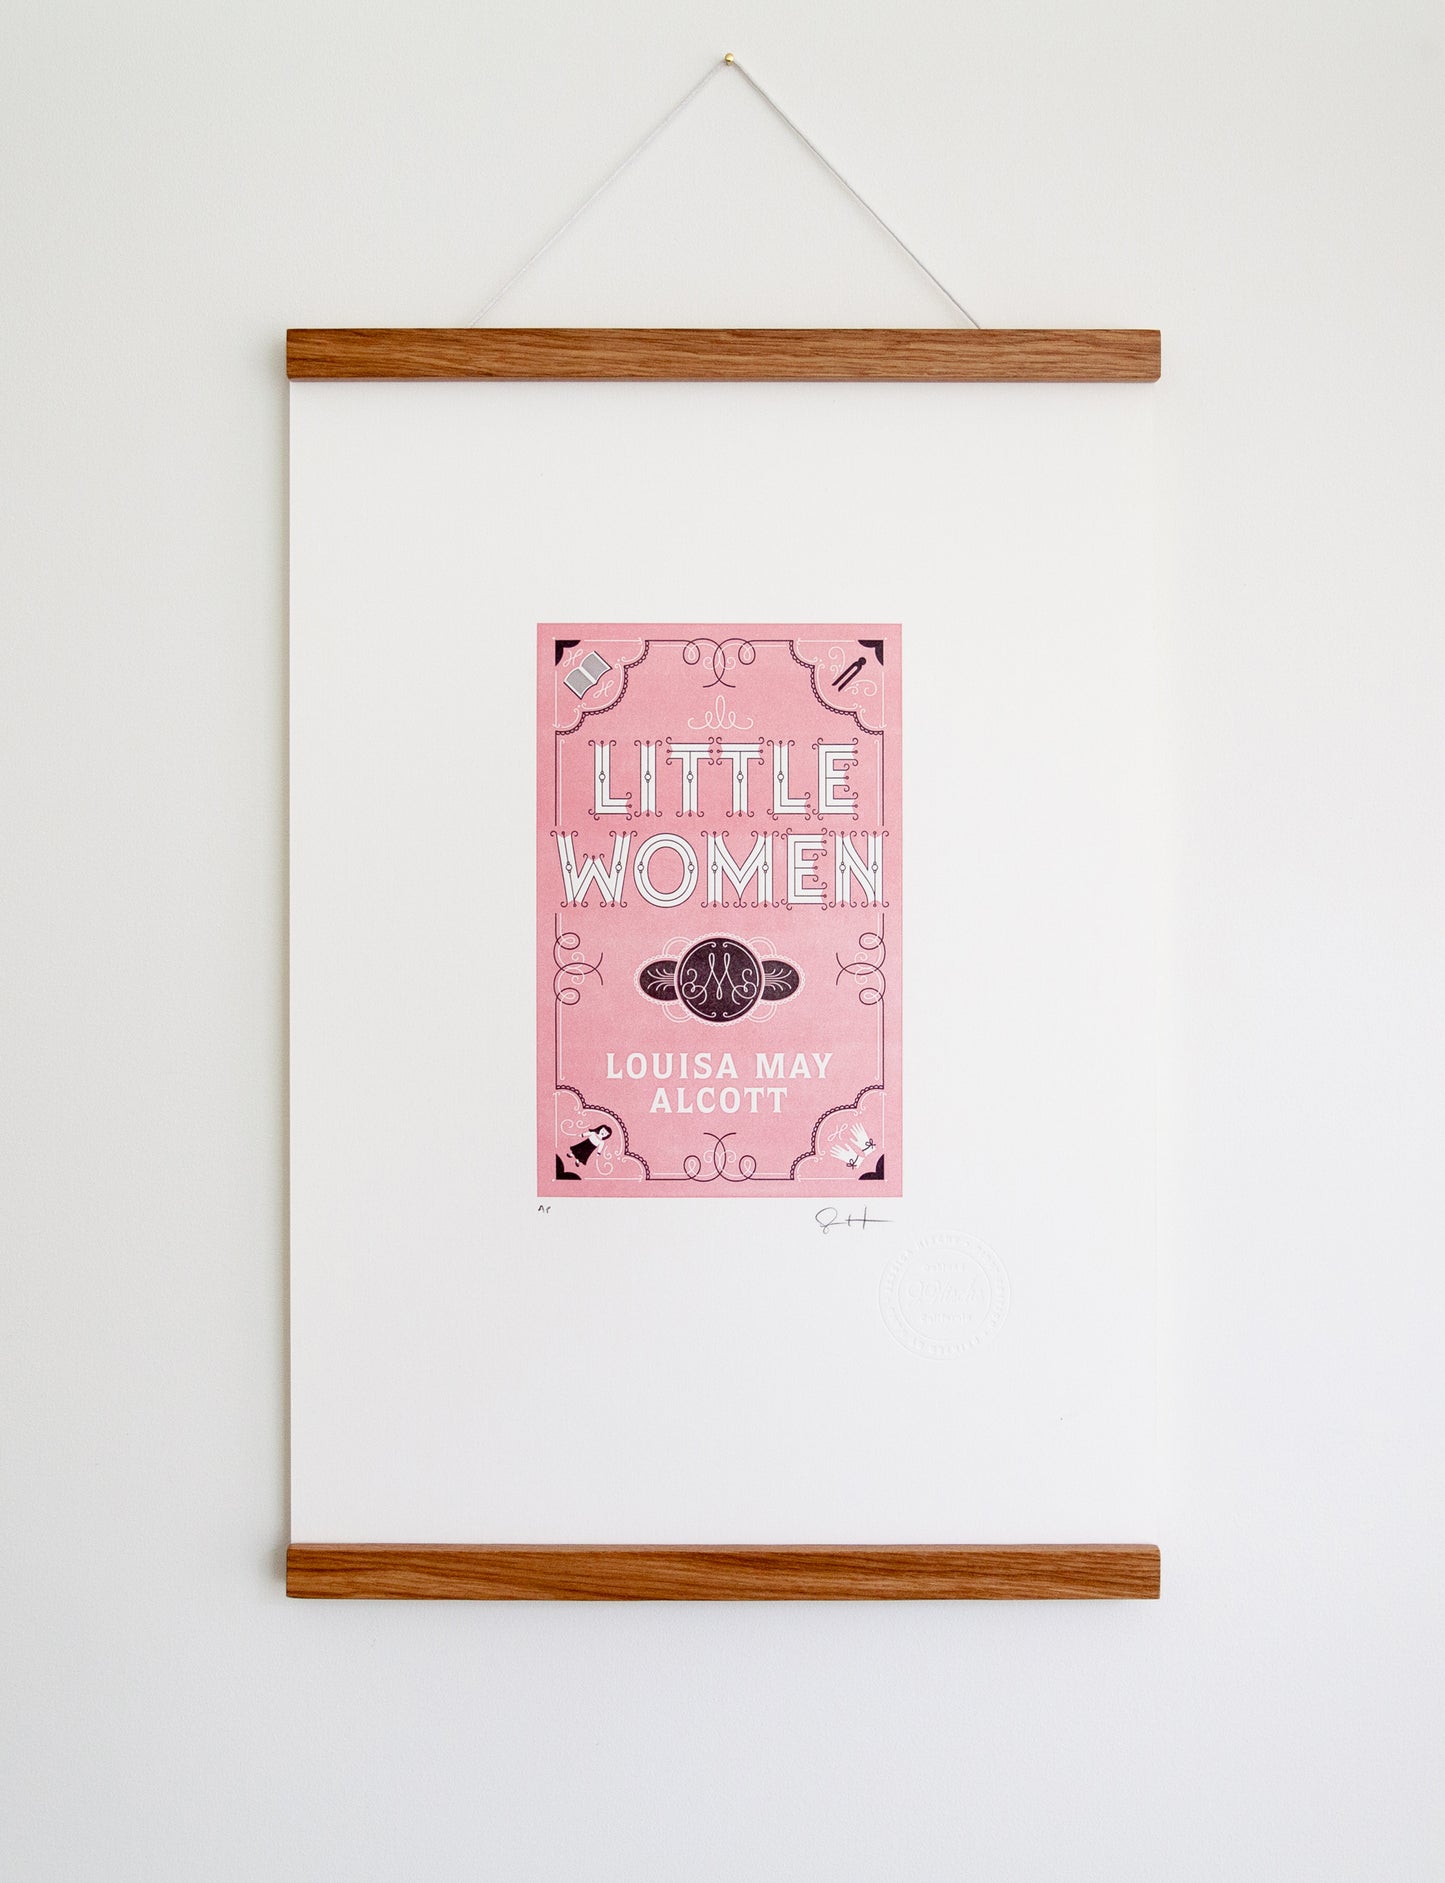 Framed 2-color letterpress print in pink and black. Printed artwork is an illustrated book cover of Little Women including custom hand lettering.